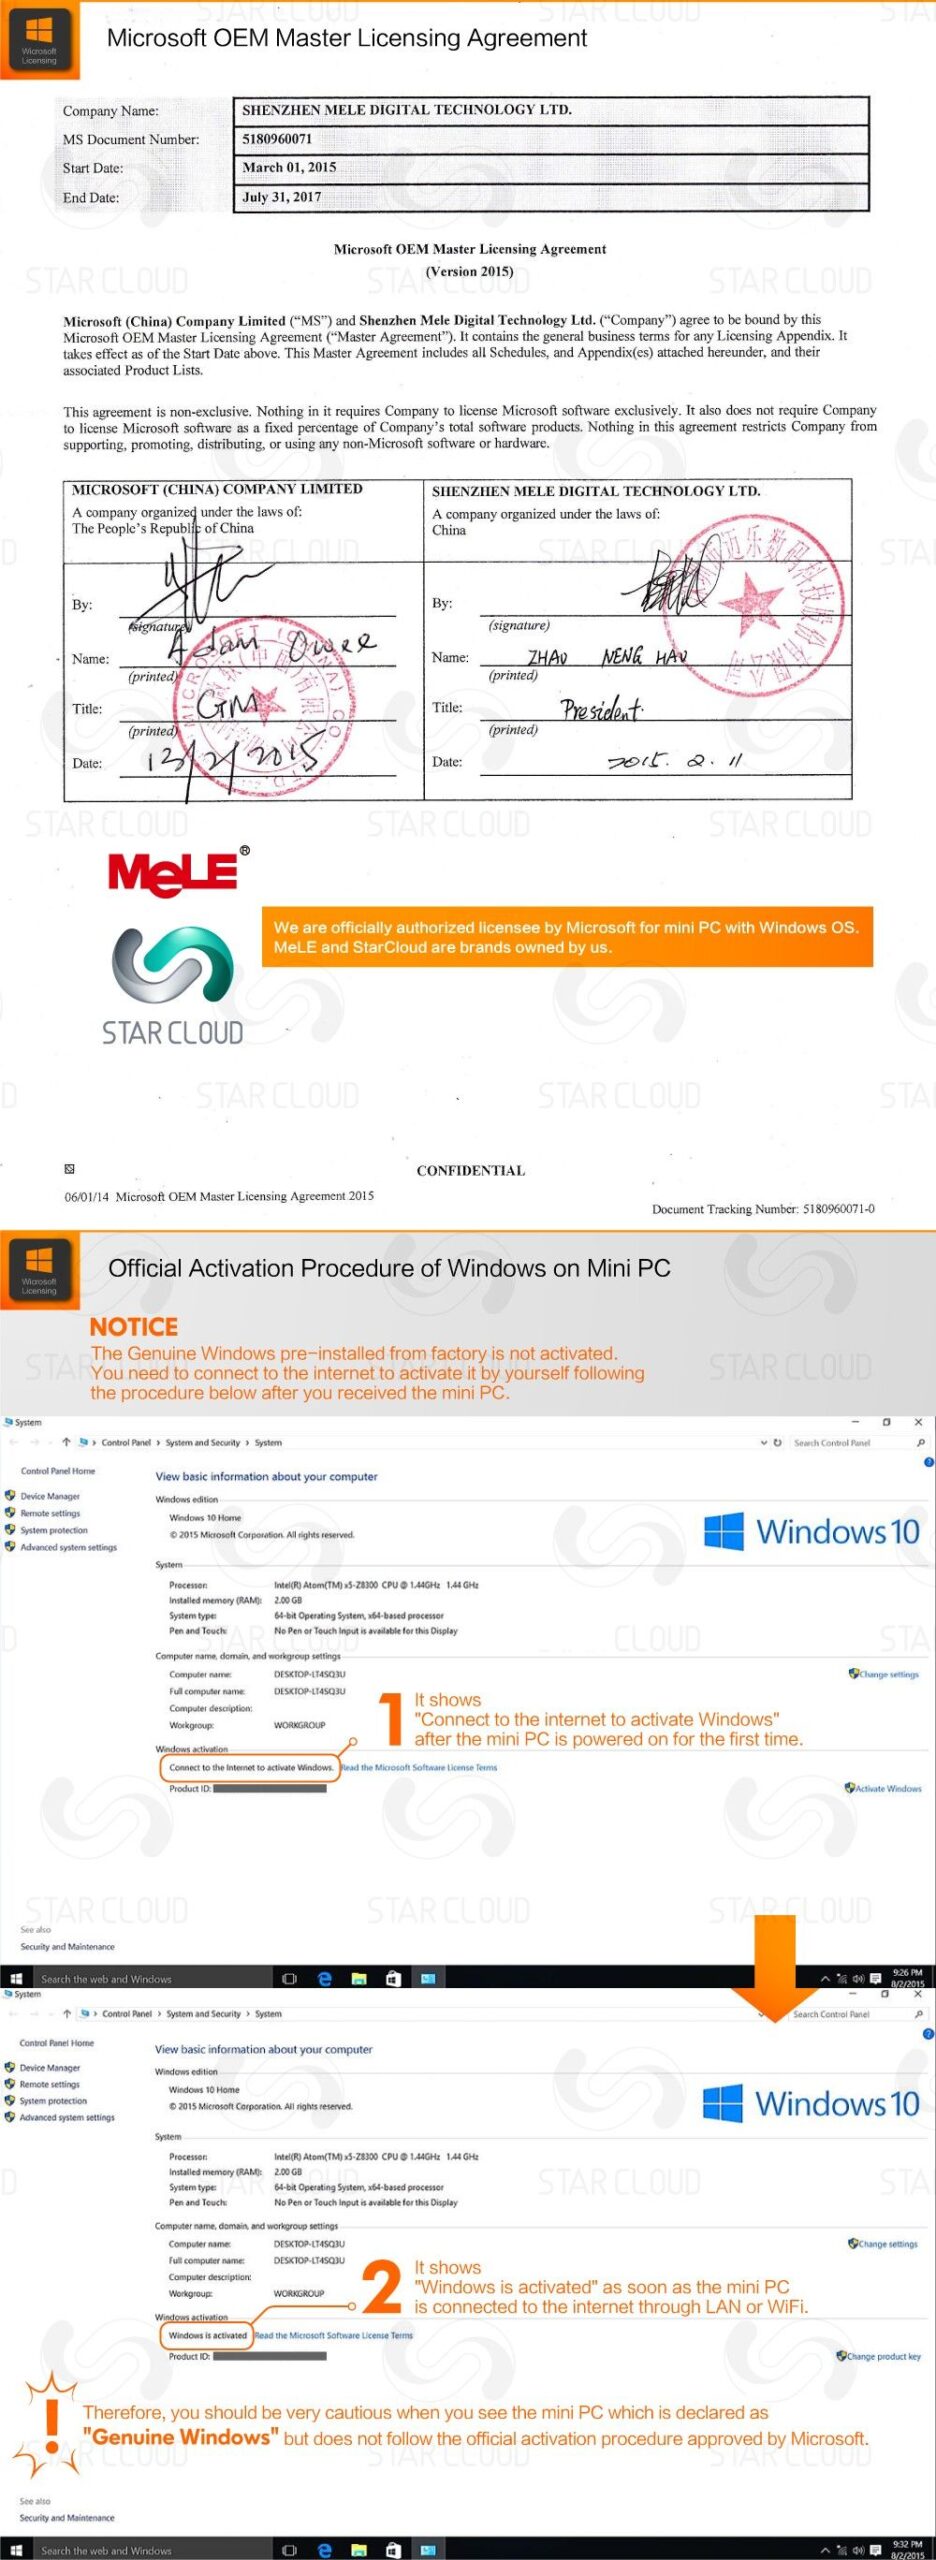 Microsoft OEM Master Licensing Agreement Company Name:	SHENZHEN MELE DIGITAL TECHNOLOGY LTD. MS Document Number:	5180960071 Start Date:	March 01, 2015 End Date:	July 31,2017 Microsoft OEM Master Licensing Agreement (Version 2015) Microsoft (China) Company Limited (“MS") and Shenzhen Mele Digital Technology Ltd. (“Company”) agree to be bound by this Microsoft OEM Master Licensing Agreement (“Master Agreement”). It contains the general business terms for any Licensing Appendix. It takes effect as of the Start Date above. This Master Agreement includes all Schedules, and Appendix(es) attached hereunder, and their associated Product Lists. This agreement is non-exclusive. Nothing in it requires Company to license Microsoft software exclusively. It also does not require Company to license Microsoft software as a fixed percentage of Company’s total software products. Nothing in this agreement restricts Company from supporting, promoting, distributing, or using any non-Microsoft software or hardware. MICROSOFT (CHINA) COMPANY LIMITED	SHENZHEN MELE DIGITAL TECHNOLOGY LTD. A company organize! under the laws of:	A company organized under the laws of: The People’s Republj: of China	China  • Name:	Name: 	 (printed (printed) Title: Title:   (printed (printed) Date: Date:  MeLE STAR CLOUD CONFIDENTIAL 06/01/14 Microsoft OEM Master Licensing Agreement 2015 Document Tracking Number: 5180960071-0 Official Activation Procedure of Windows on Mini PC NOTICE The Genuine Windows pre-installed from factory is not activated. You need to connect to the internet to activate it by yourself following the procedure below after you received the mini PC. **System Control Rand > System and Security > System	Control Panel Control Panel Home	View basic information about your computer Device Manager	Widows edition Remote settings	Window 10 Home System protection 2016 Microsoft Corporation All rights reserved Advanced system settings System Processor:	Intel(R) Atom(TM) xi-ZMOO CPU O 1.44GHz 1.44 GHz Installed memory (RAM):	2.00 GB System type;	64-bit Operating System, x64 based processor Pen and Touch:	No Pen or Touch Input n available for this Otsplay Computer name, domain, and workgroup settings Computer name:		hang-writing Settings Fid computer name.	DlSKIOP-LI4SQ3U	.. , Computer description: workgroup WORKGROUP "Connect to the internet to activate Windows" after the mini PC is powered on for the first time. Connect to the Internet to activate Windows Read the Microsoft Software License Terms Product ID.	Activate Windows See also Security and Maintenance Control Rand > System and Security > System	Search Control Panel  Control Panel Home View basic information about your Computer Device Manager	Windows edition Remote settings	Windows Home System protection	© 201S Microsoft Corporation. All rights reserved Advanced system settings System Processor.	Intel(R) Atom(TM) *5-ZSJ00 CPU 9 1.44GHz 1.44 GHz Installed memory (RAM):	2.00 GB System type:	64-bit Operating System. x64-based processor Pen and Touch:	No Pen or Touch Input is available for this Display Computer name, domain, and workgroup settings Computer name:	DESKTOP-IT4SQ3U	Change settings Full computer name	DEKTOO-ITISOIU Computer description: WORKGROUP Windows is activated as soon as the mini PC is connected to the internet through LAN or WiFi. Windows activator Windows is activated the Microsoft Software License Terms Product ID:	Change product key Therefore, you should be very cautious when you see the mini PC which is declared as "Genuine Windows" but does not follow the official activation procedure approved by Microsoft. See also Security and Maintenance